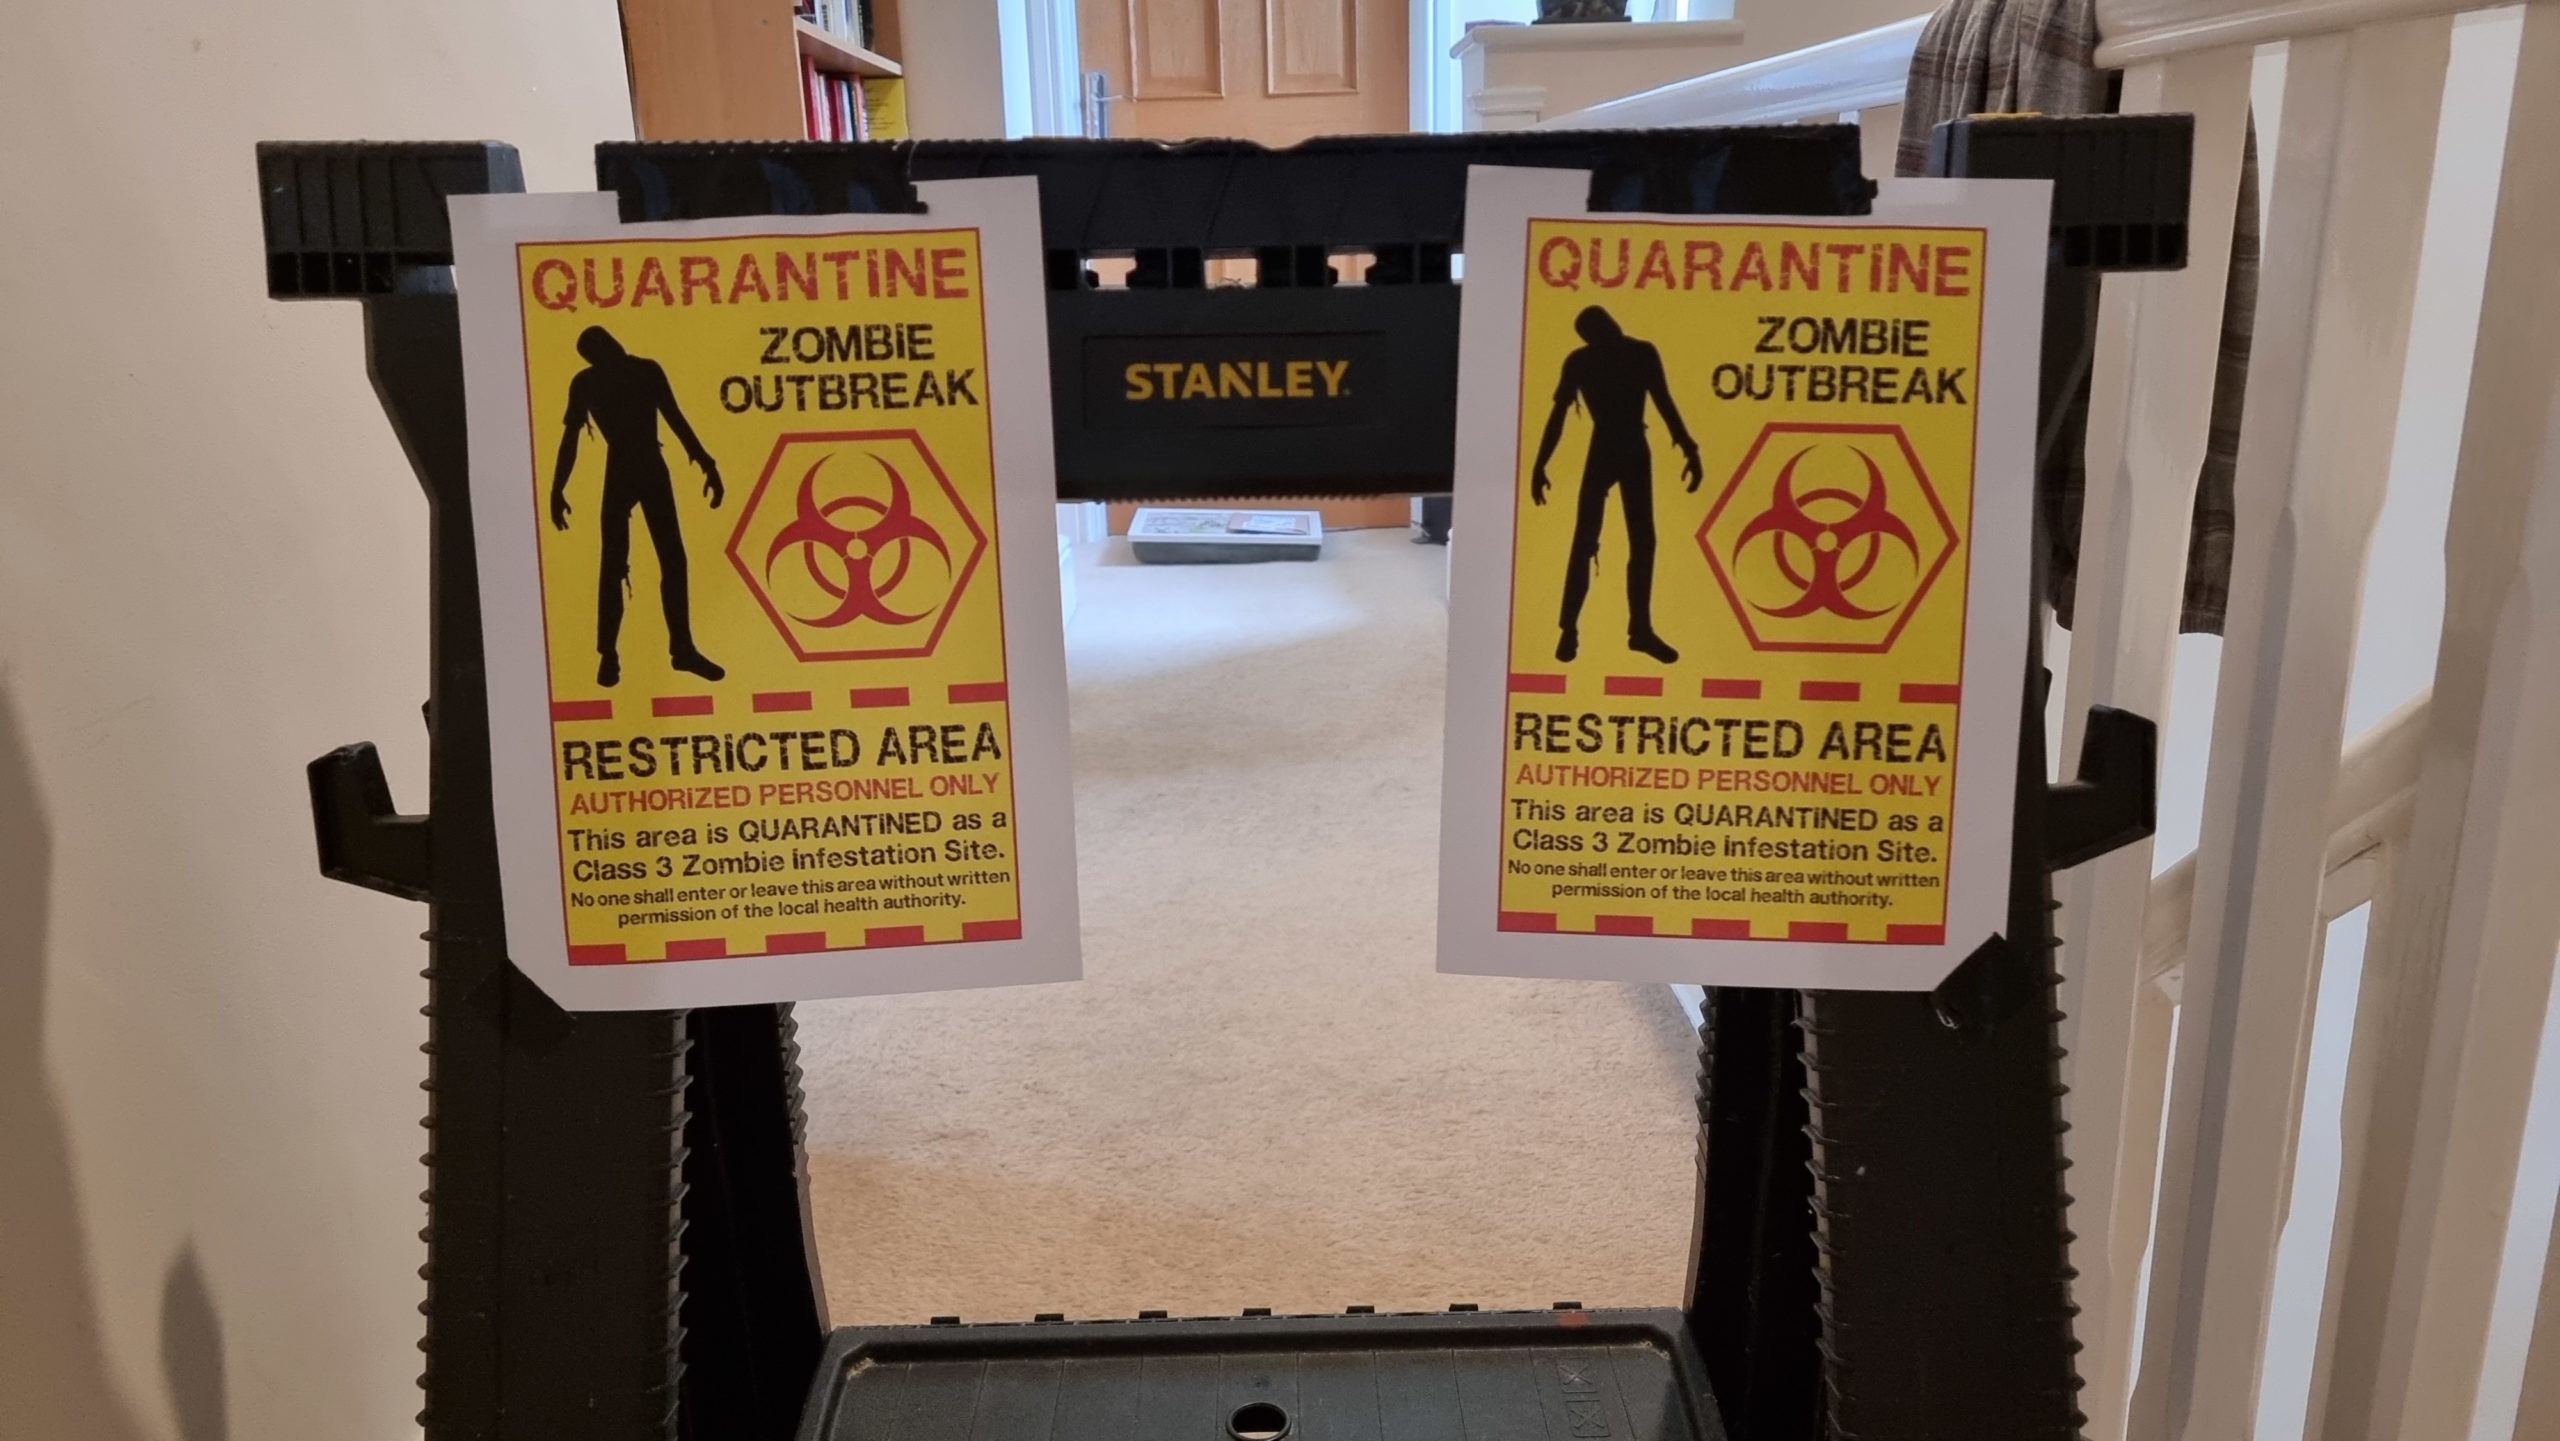 Barricade with signs reading "Quarantine: Zombie Outbreak"